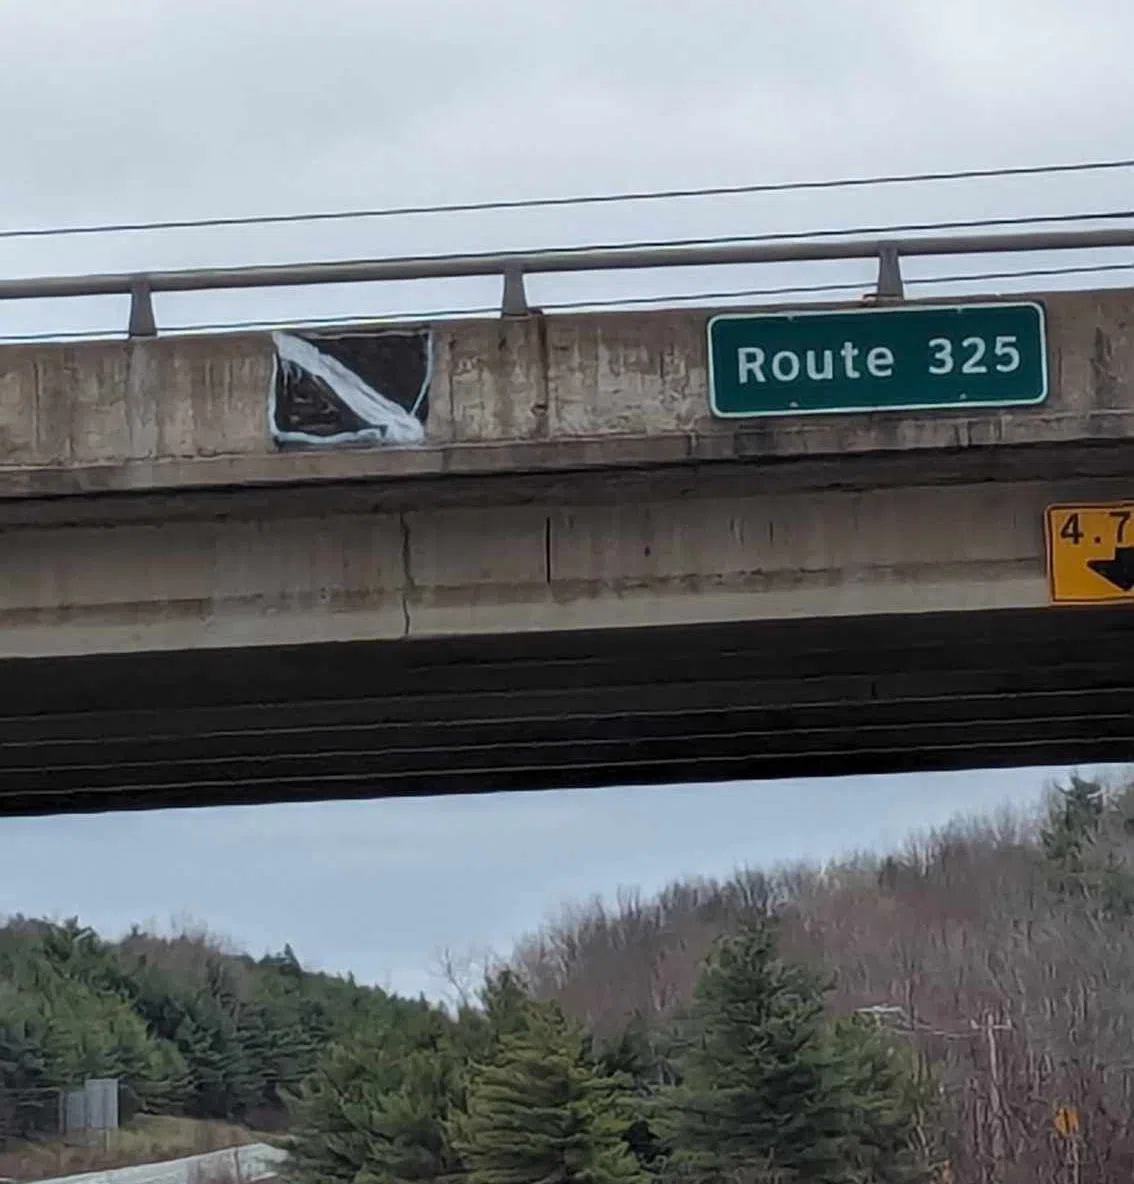 Public Works condemns hate symbols on Highway 103 overpasses